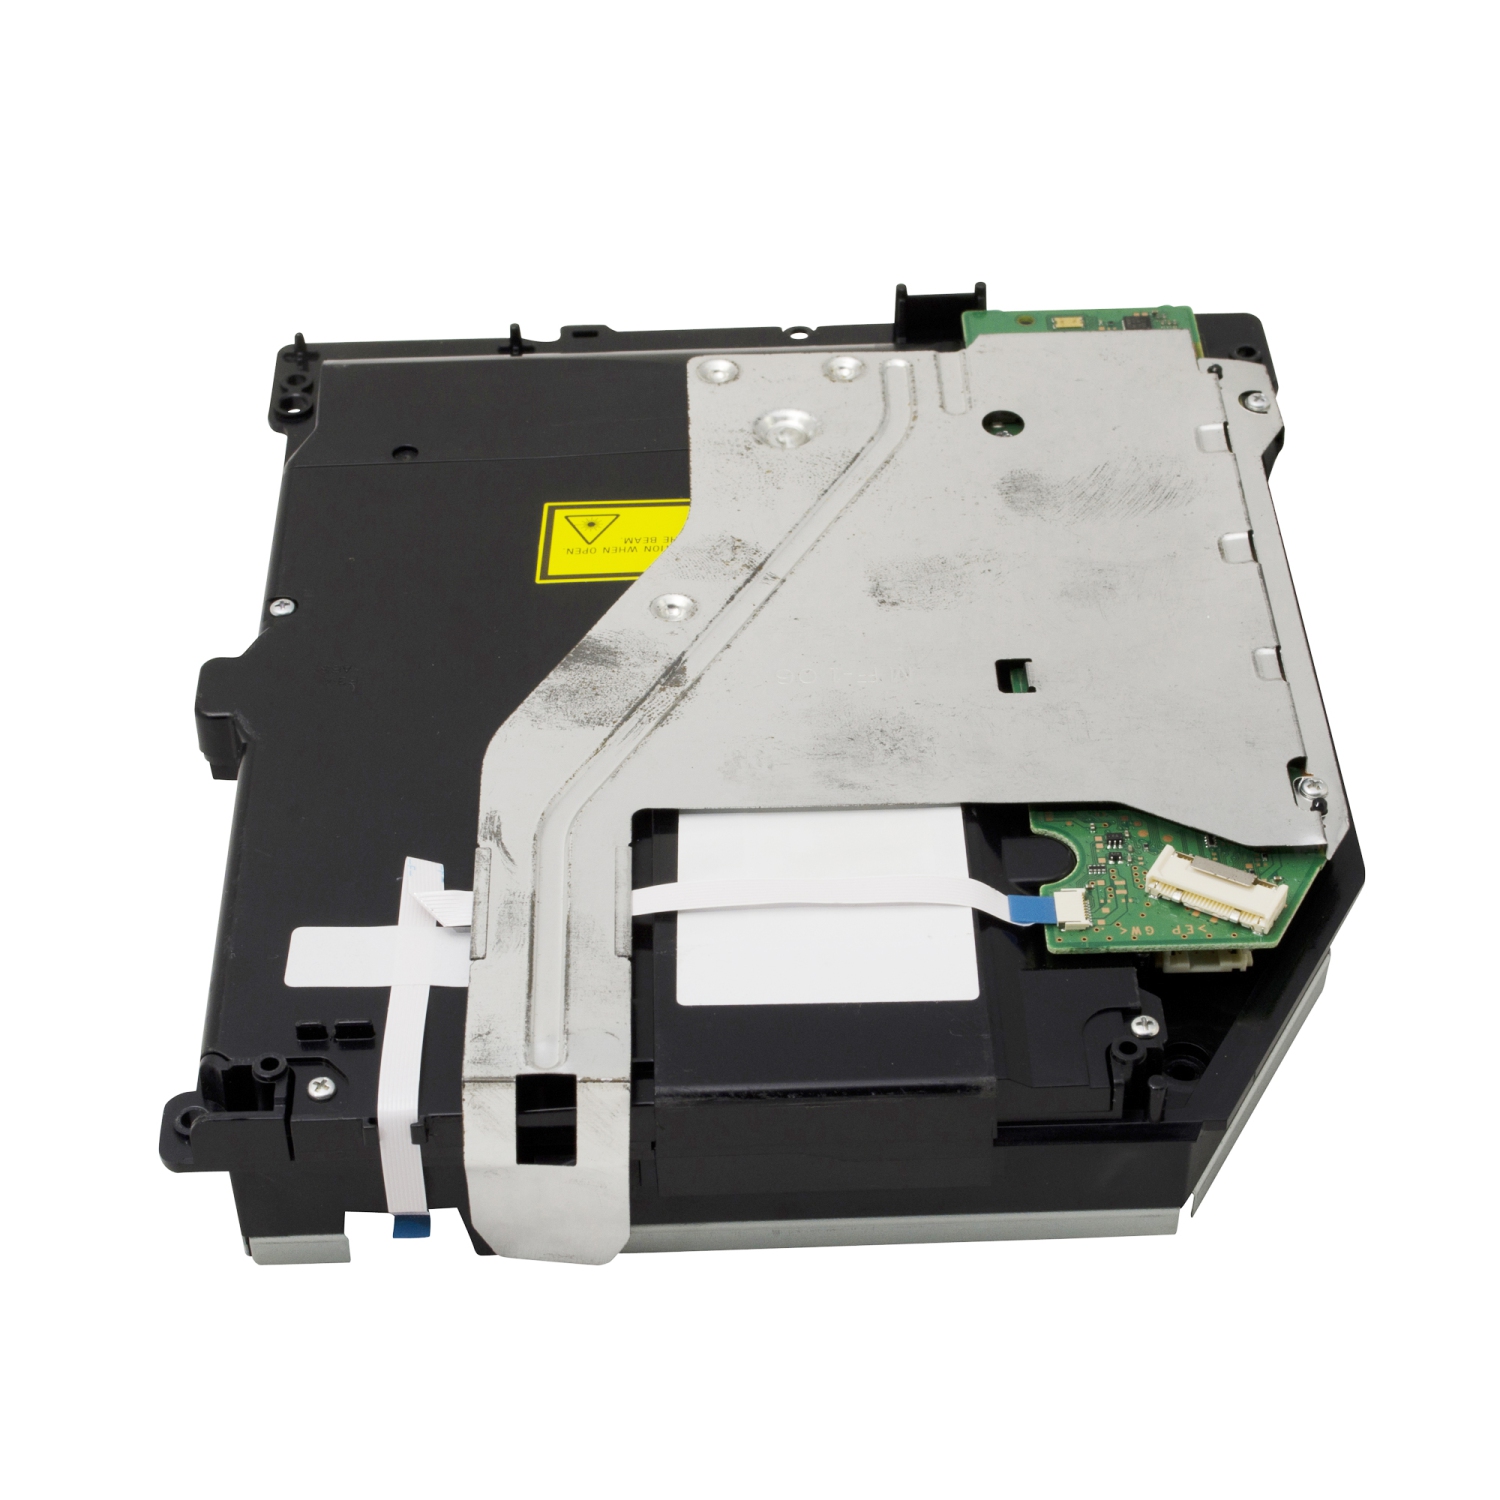 Replacement Blu Ray Disc Drive Dvd Drive Kem 860a Kem 860 Kem 860aaa Laser For Ps4 Cuh 1115a Cuh 1001a Phat Version Best Buy Canada